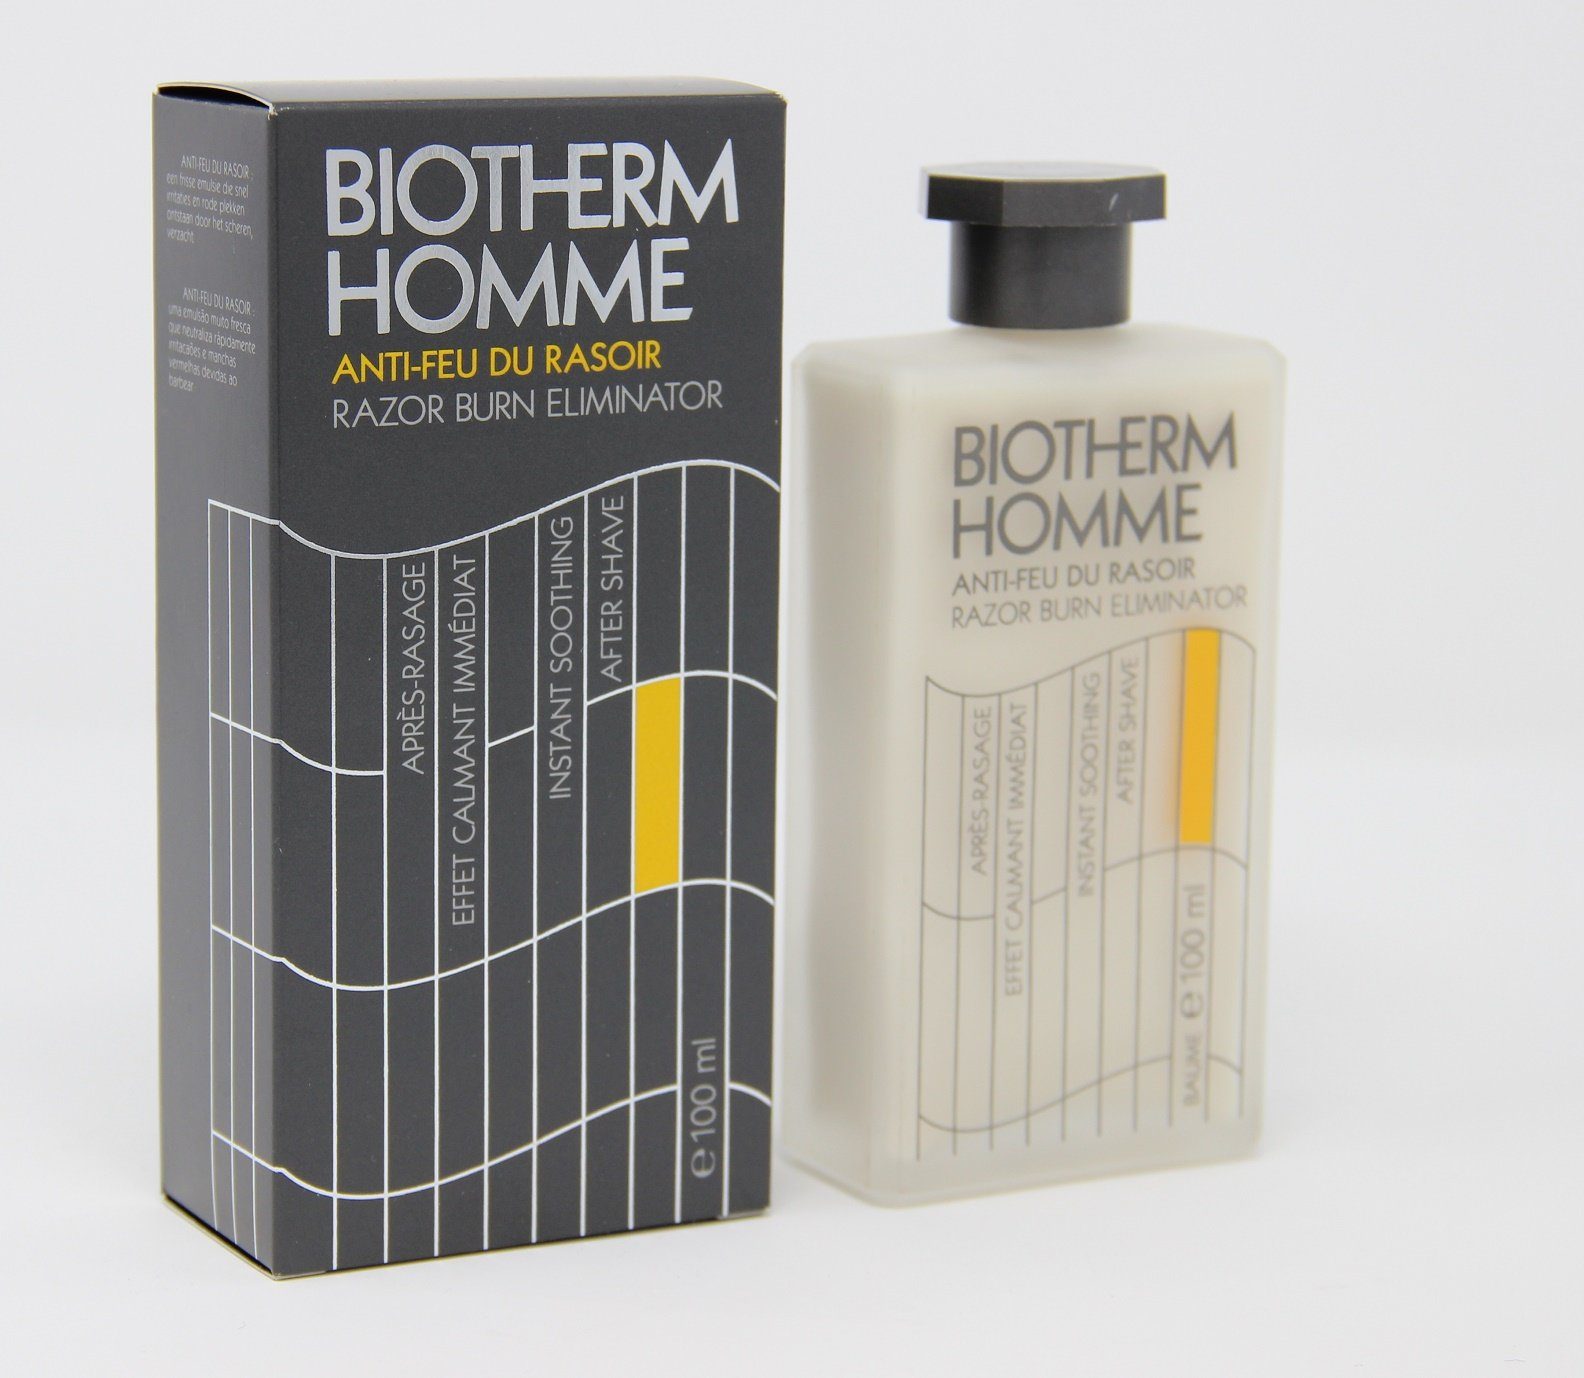 After-Shave After BIOTHERM shave 100ml Balm Homme Biotherm